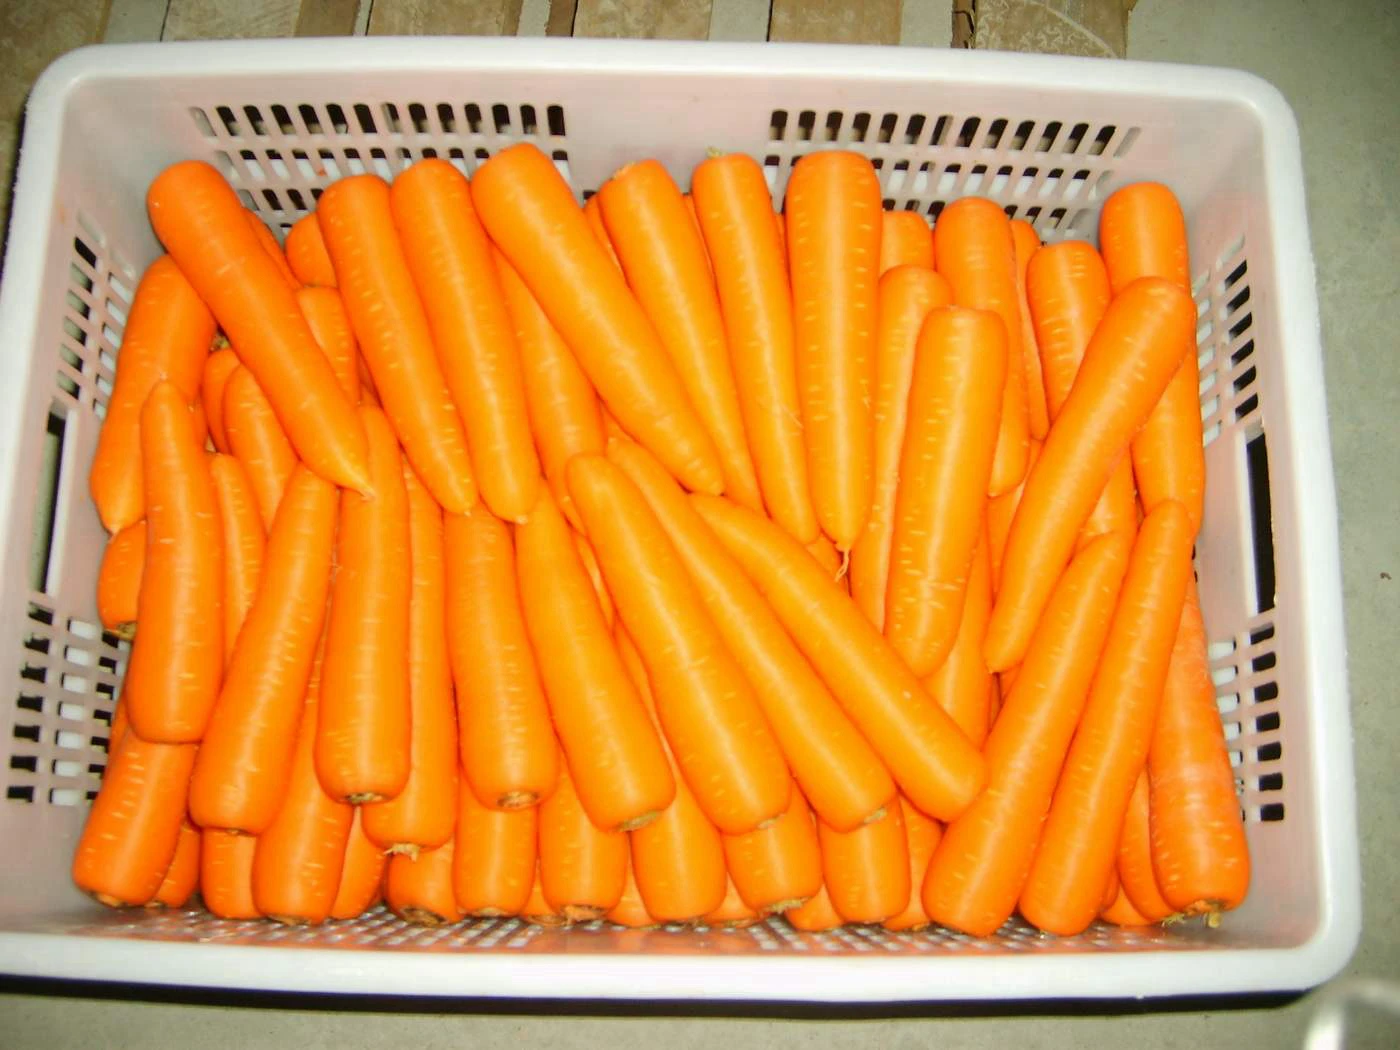 
2021 new crop fresh carrot/carrots full of vitamin c carrot from China 